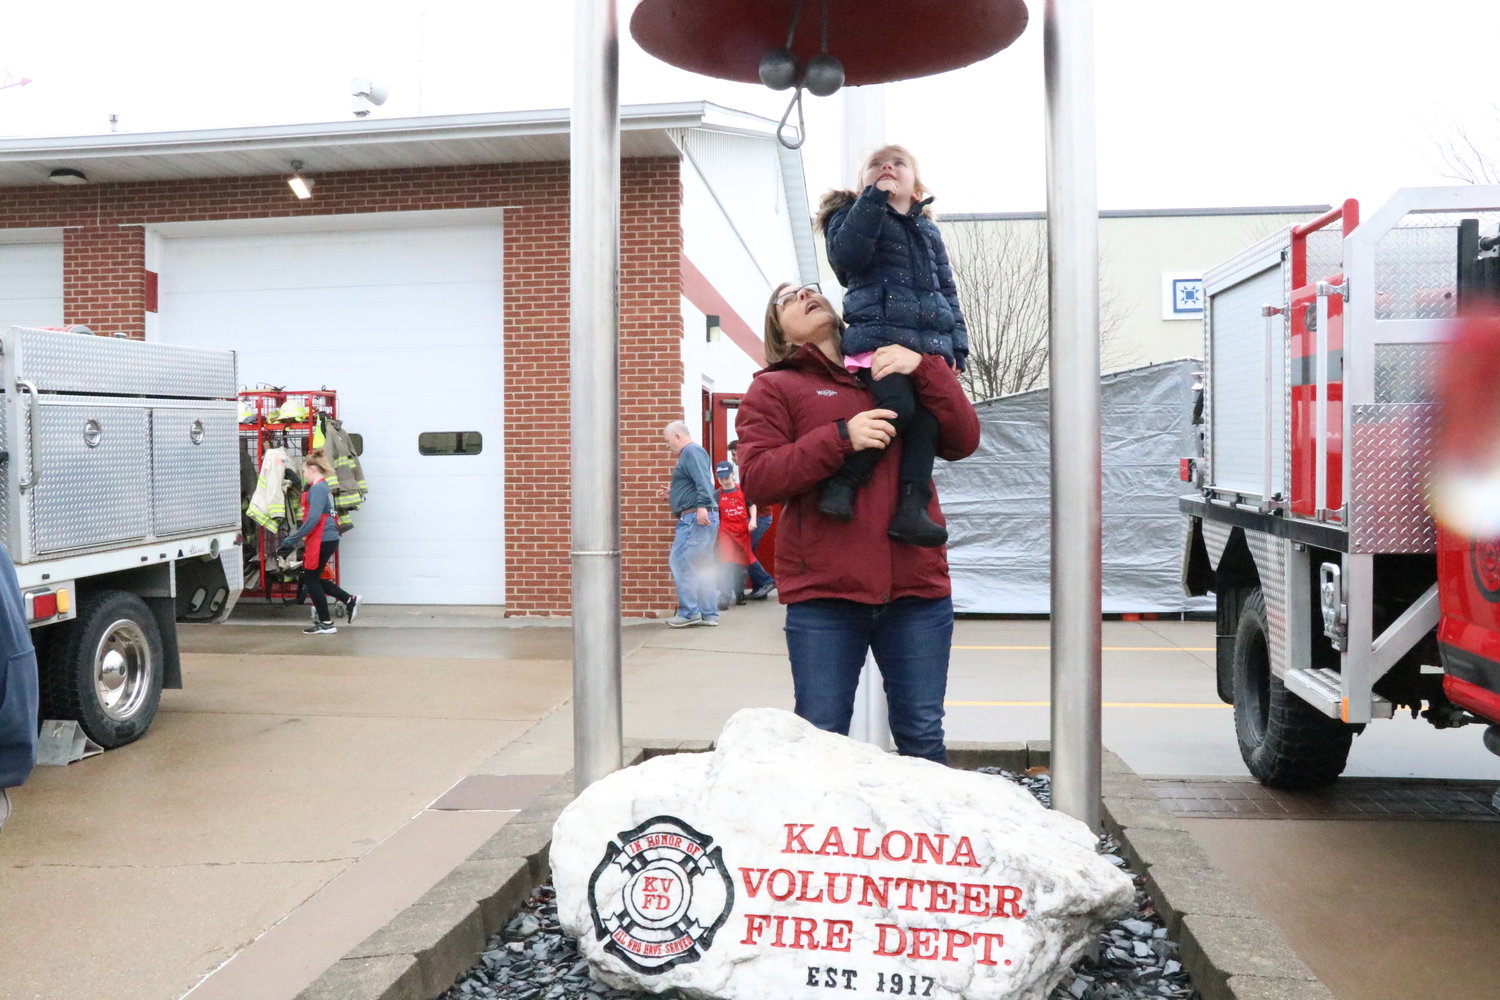 Pancake Day also gives youngsters an opportunity to see the fire trucks, equipment and fire station and to learn about what the firefighters do to protect the community. The KVFD also visits schools at least once a year to teach students about fire safety.